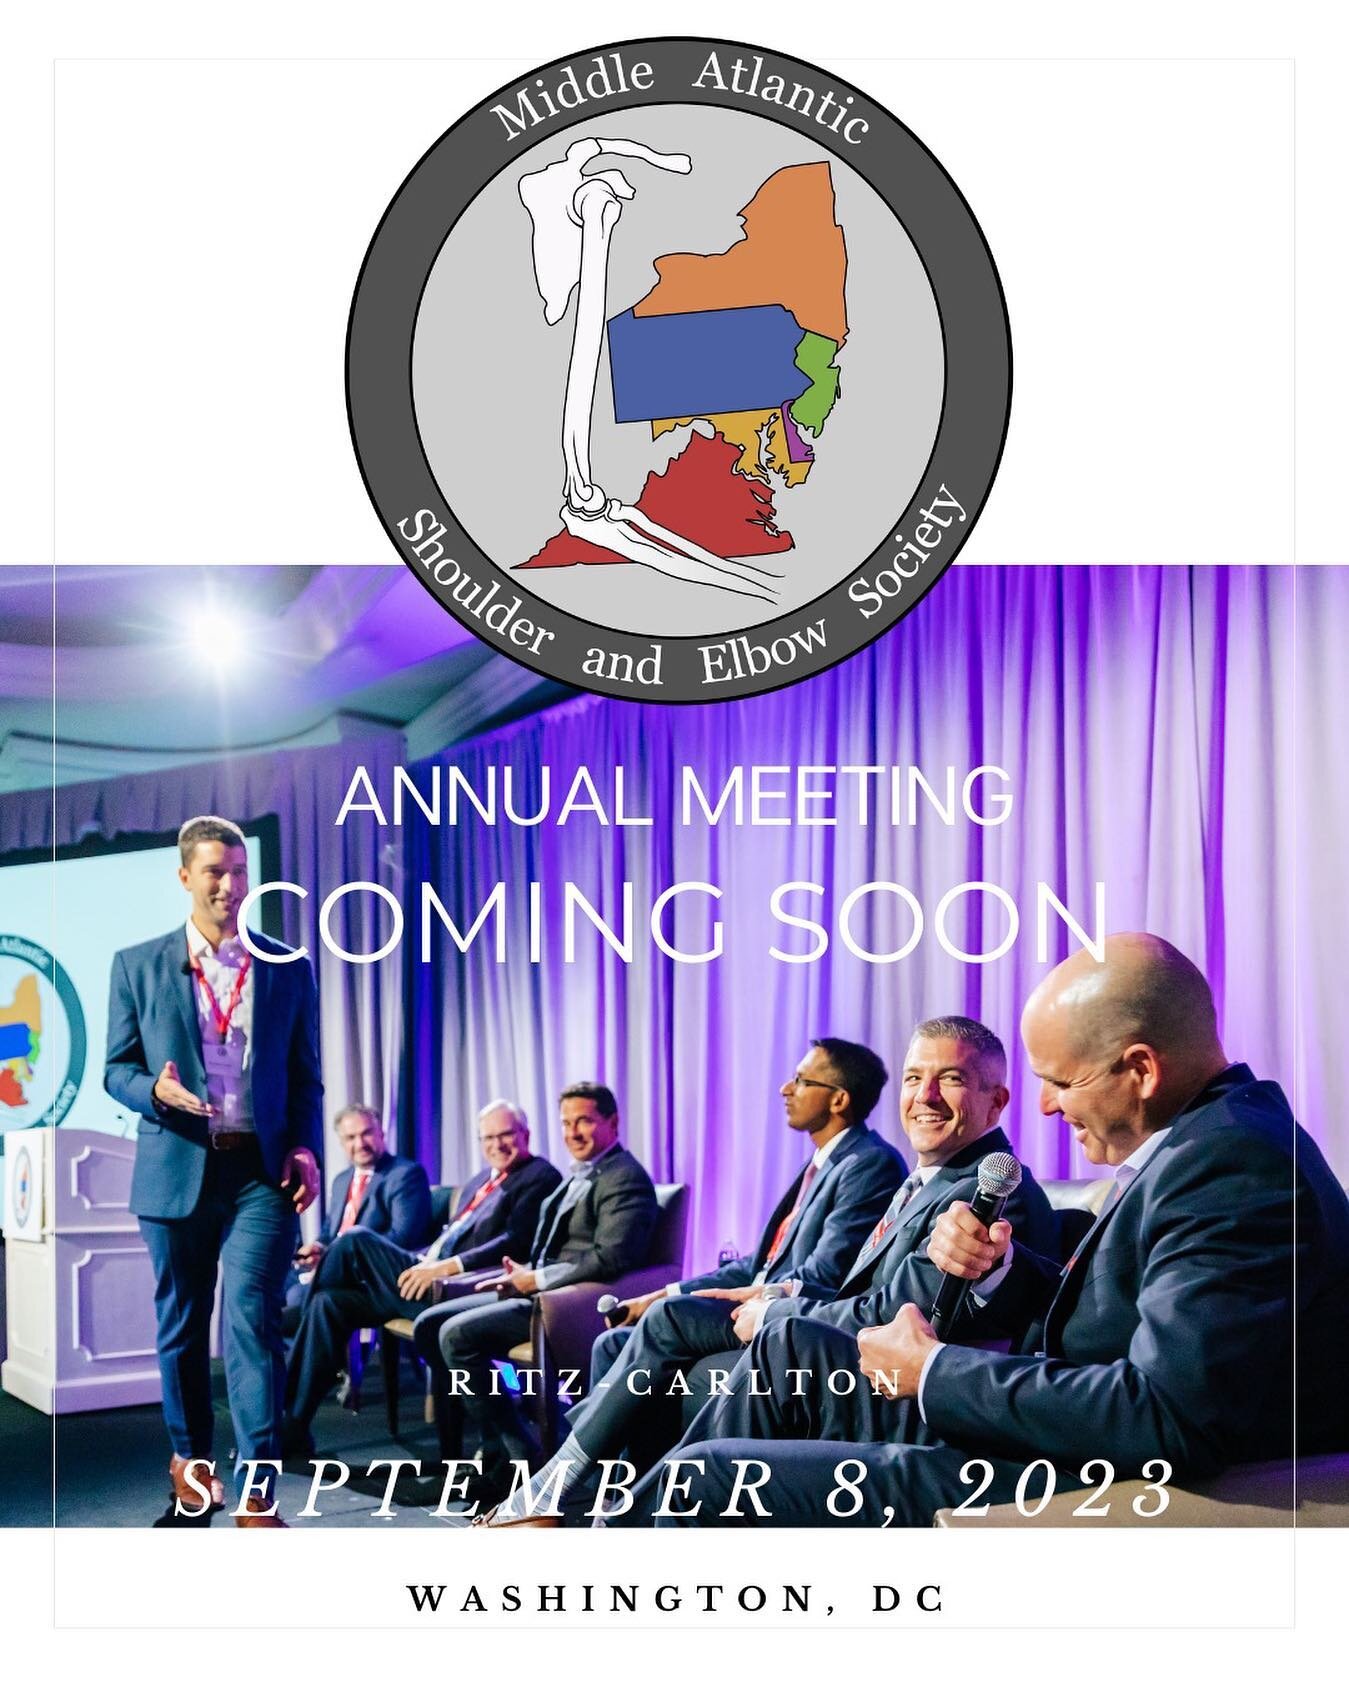 MASES Annual Meeting will be held Friday, September 8, 2023. Expect a program packed with lectures, lively debate, discussion and networking. Visit the link in the bio for more info - we look forward to seeing you there!

#orthopedicsurgery #shoulder